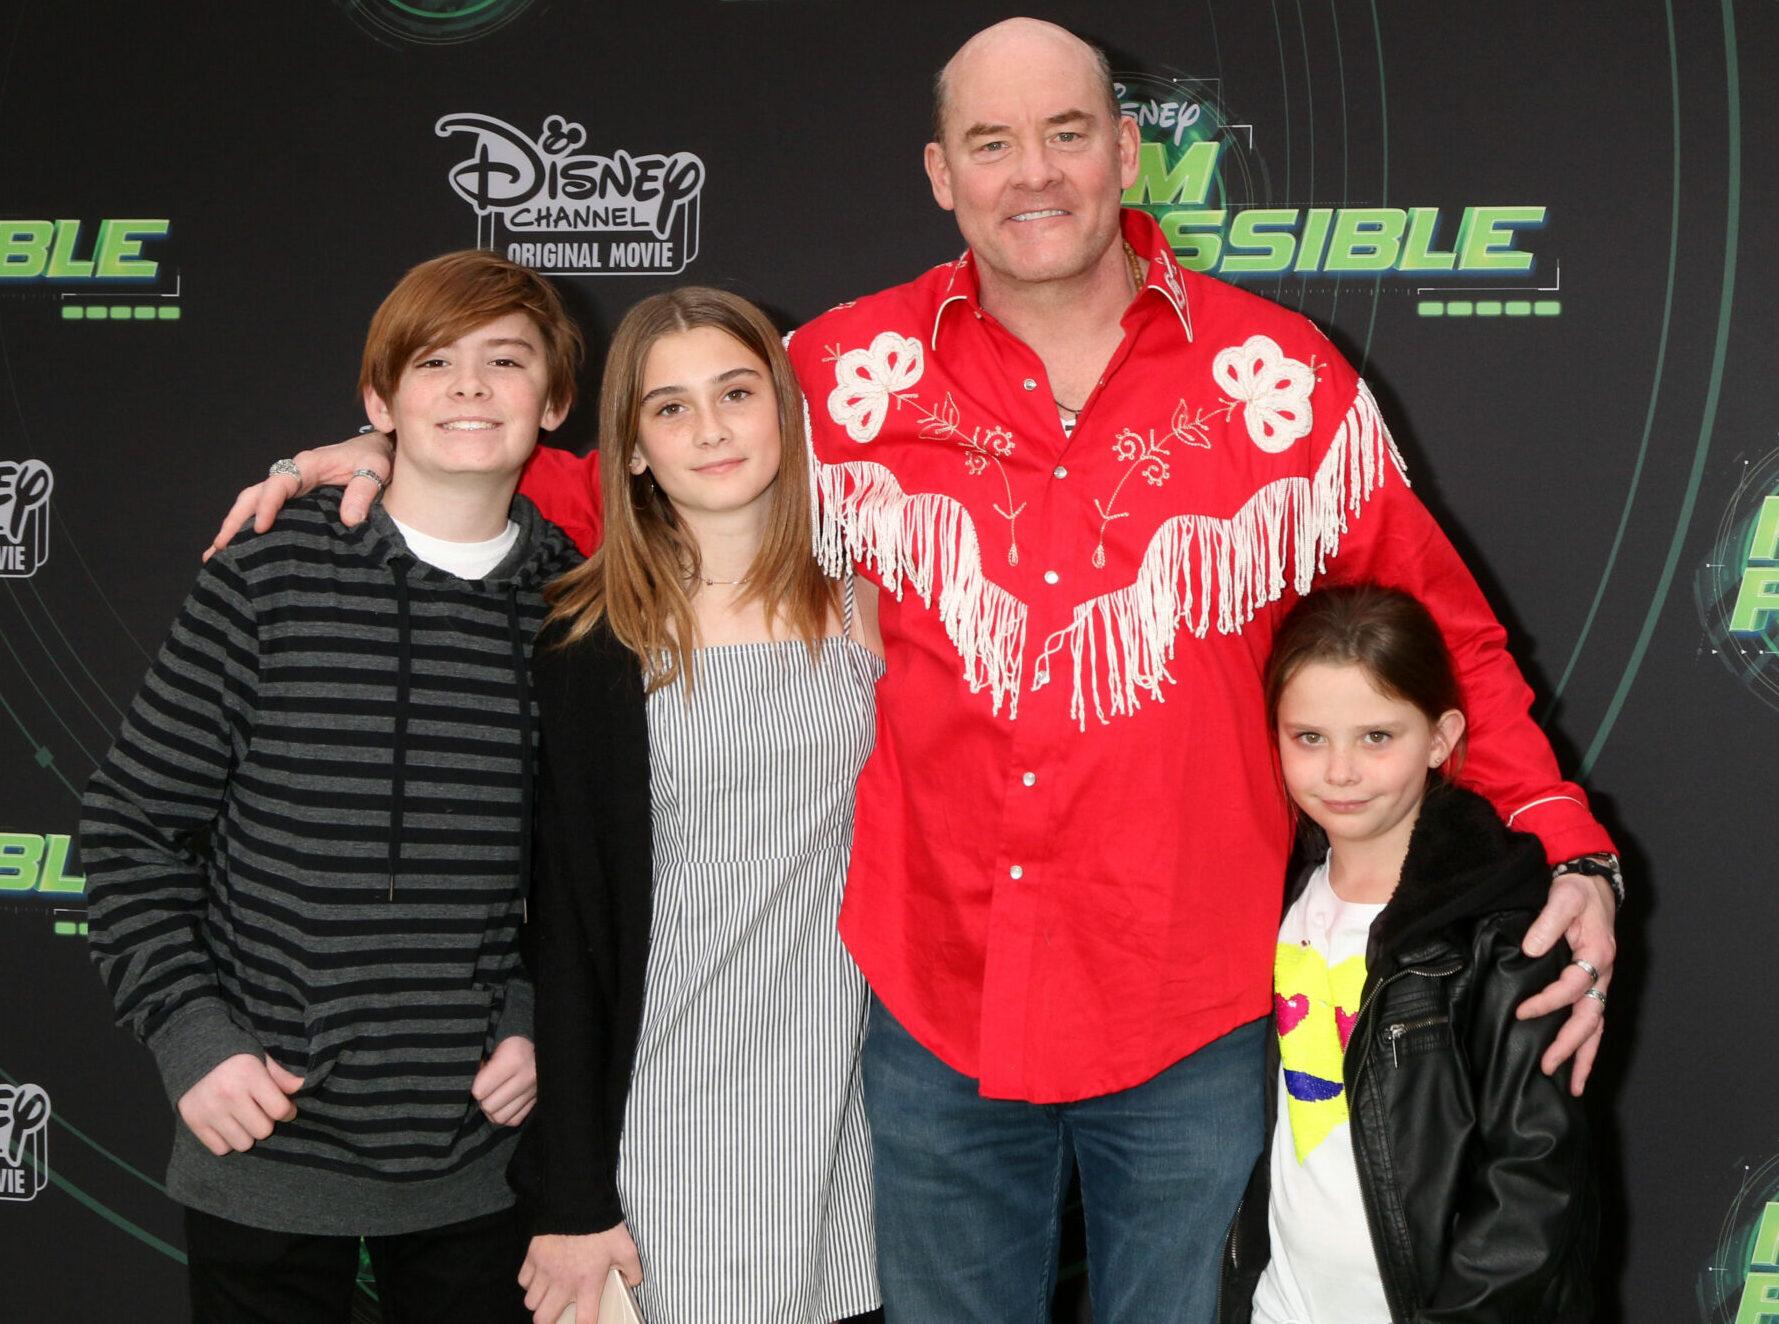 David Koechner, children at the "Kim Possible" Premiere Screening at the TV Academy on February 12, 2019 in Los Angeles, CA